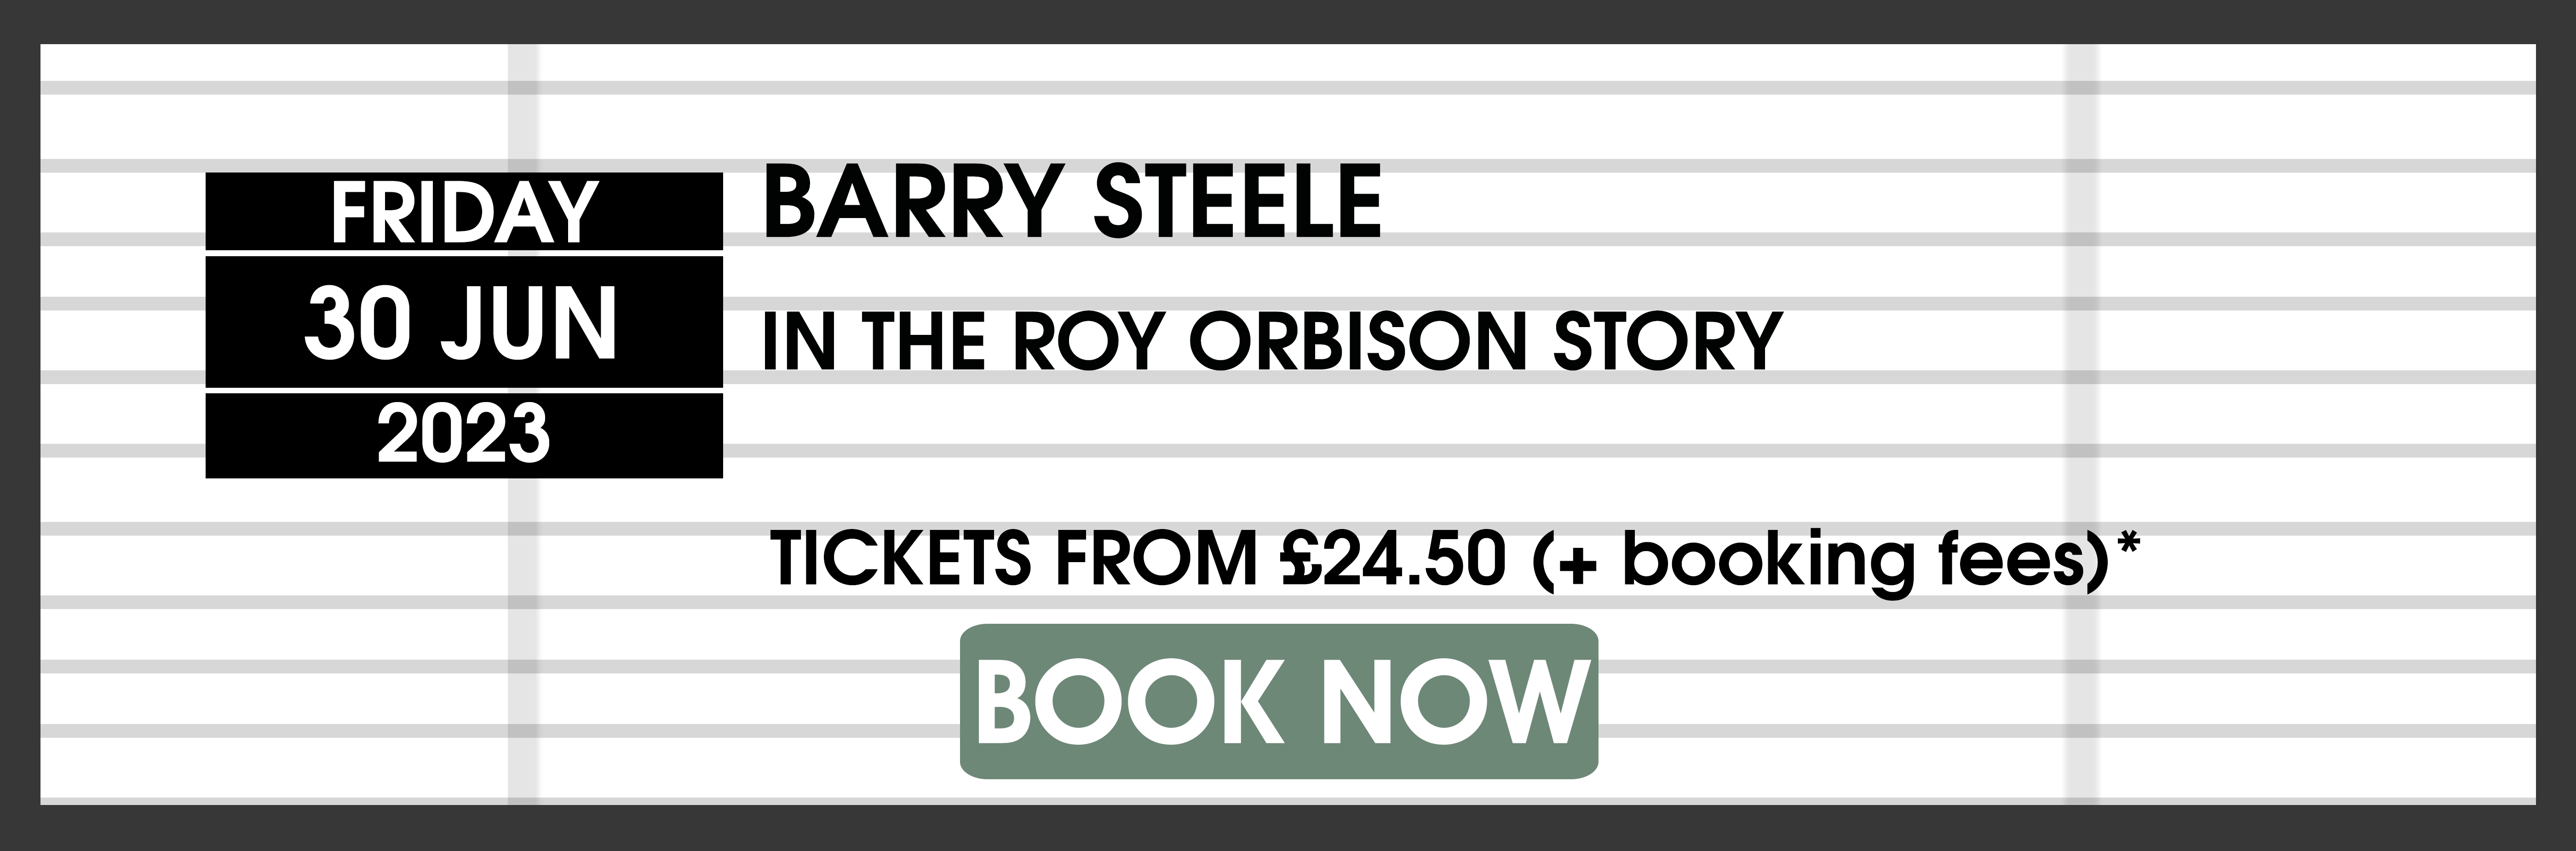 23.06.30 Barry Steele book now